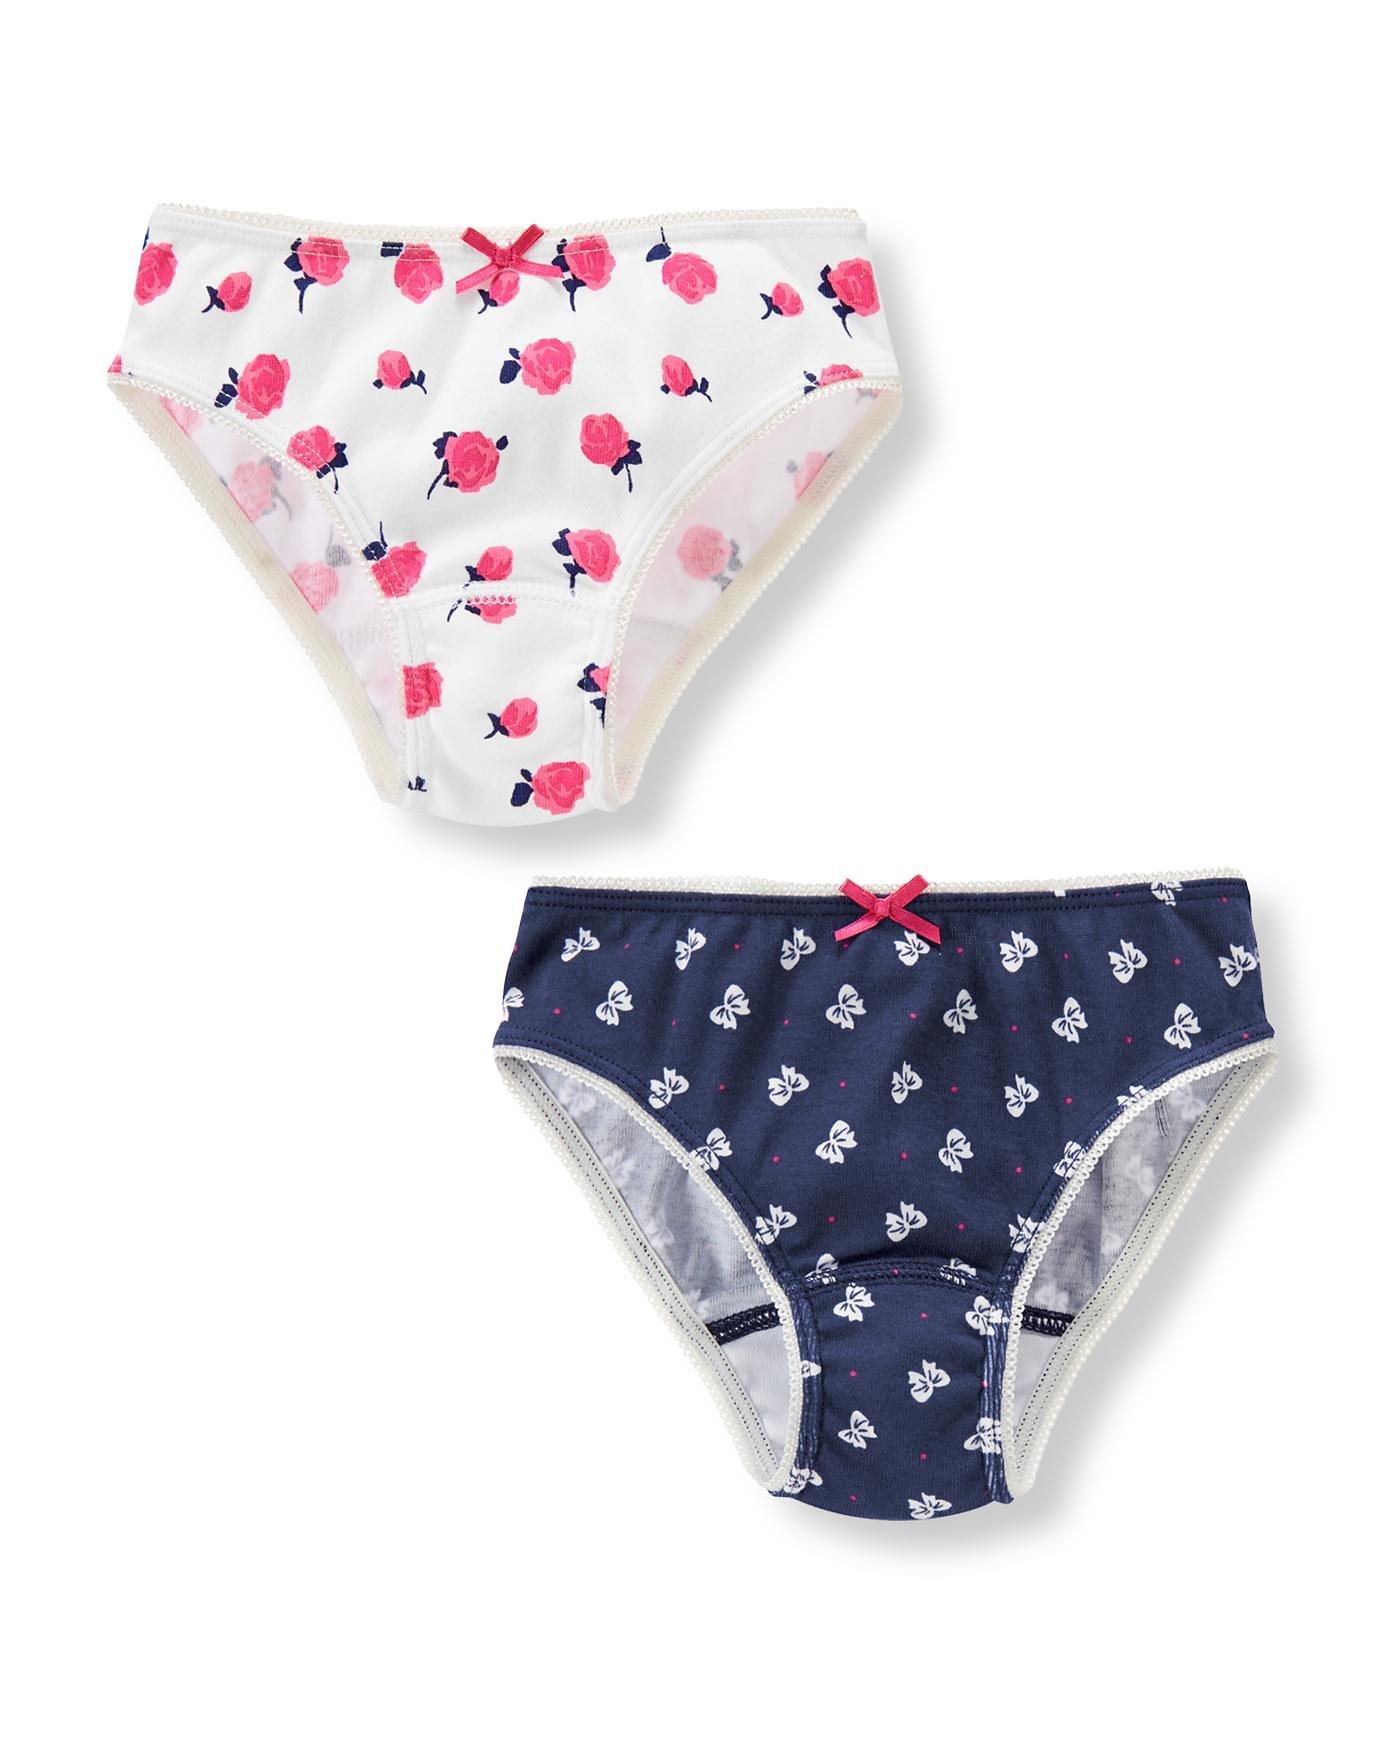 Roses and Bows Underwear Two-Pack image number 0